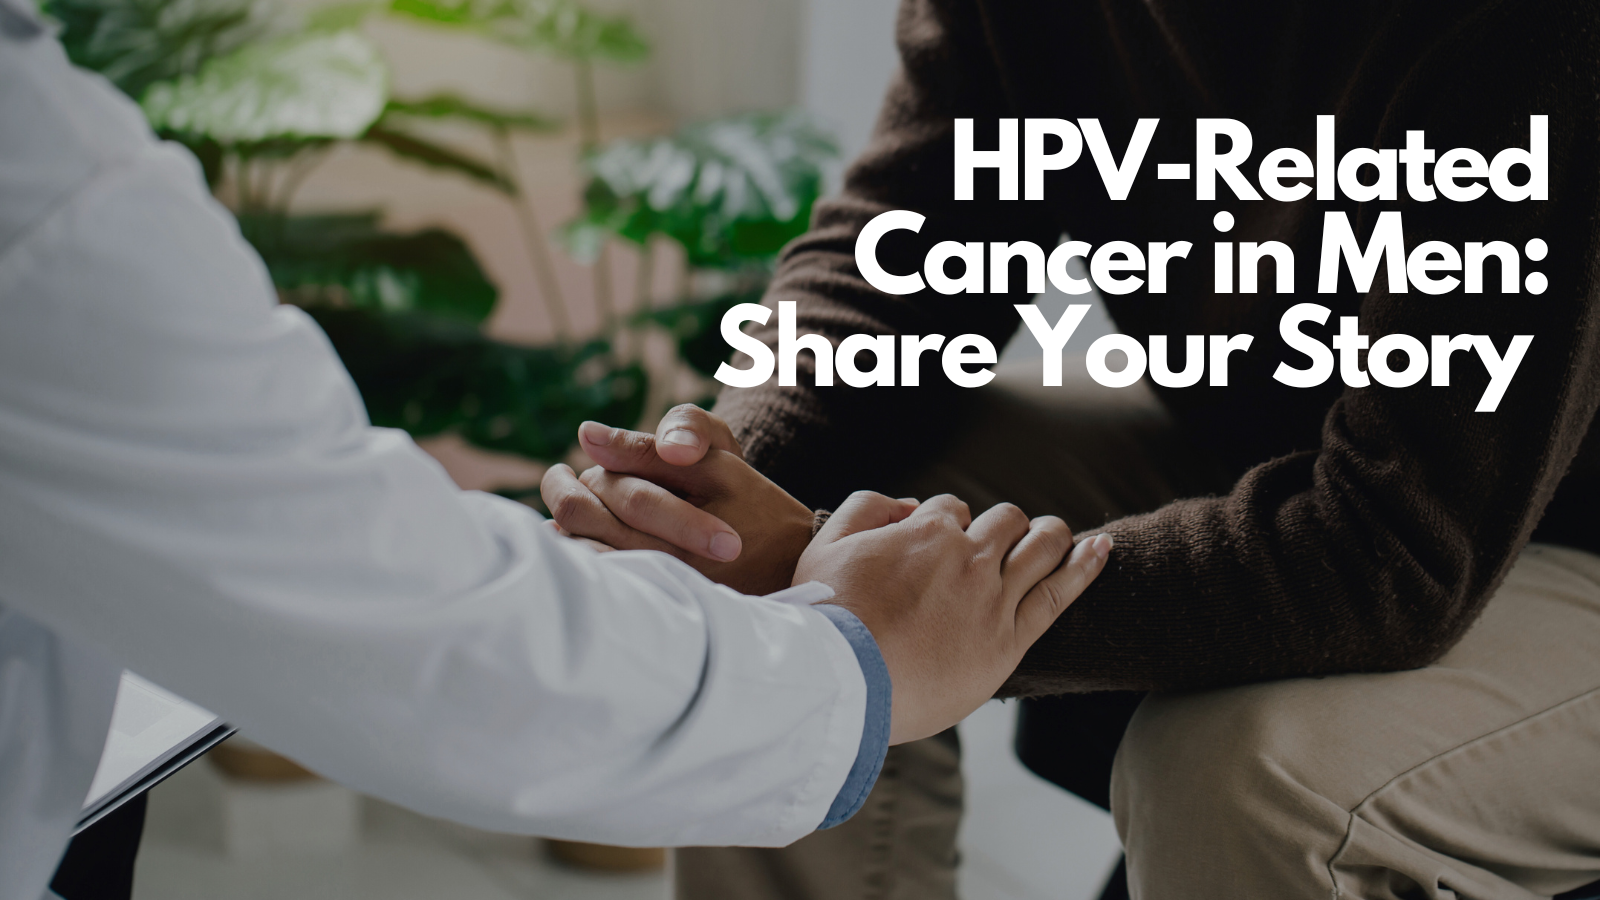 HPV-Related Cancer in Men: Share Your Story